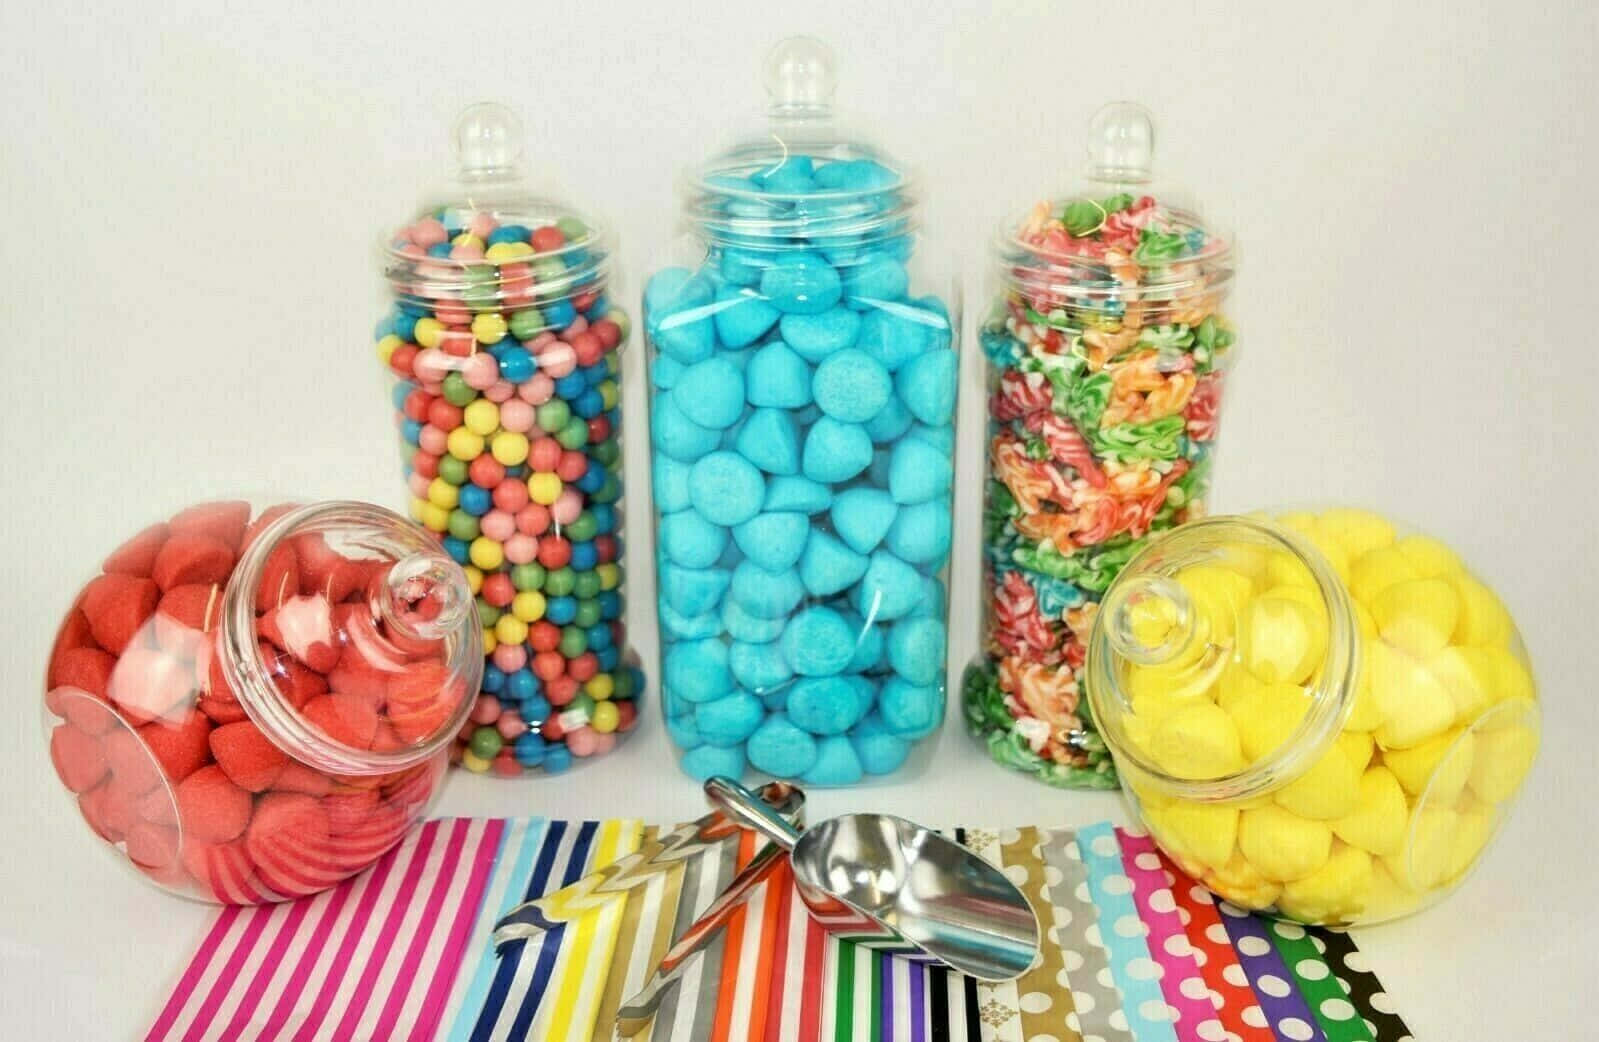 Sweeten your day with this yummy Candy!